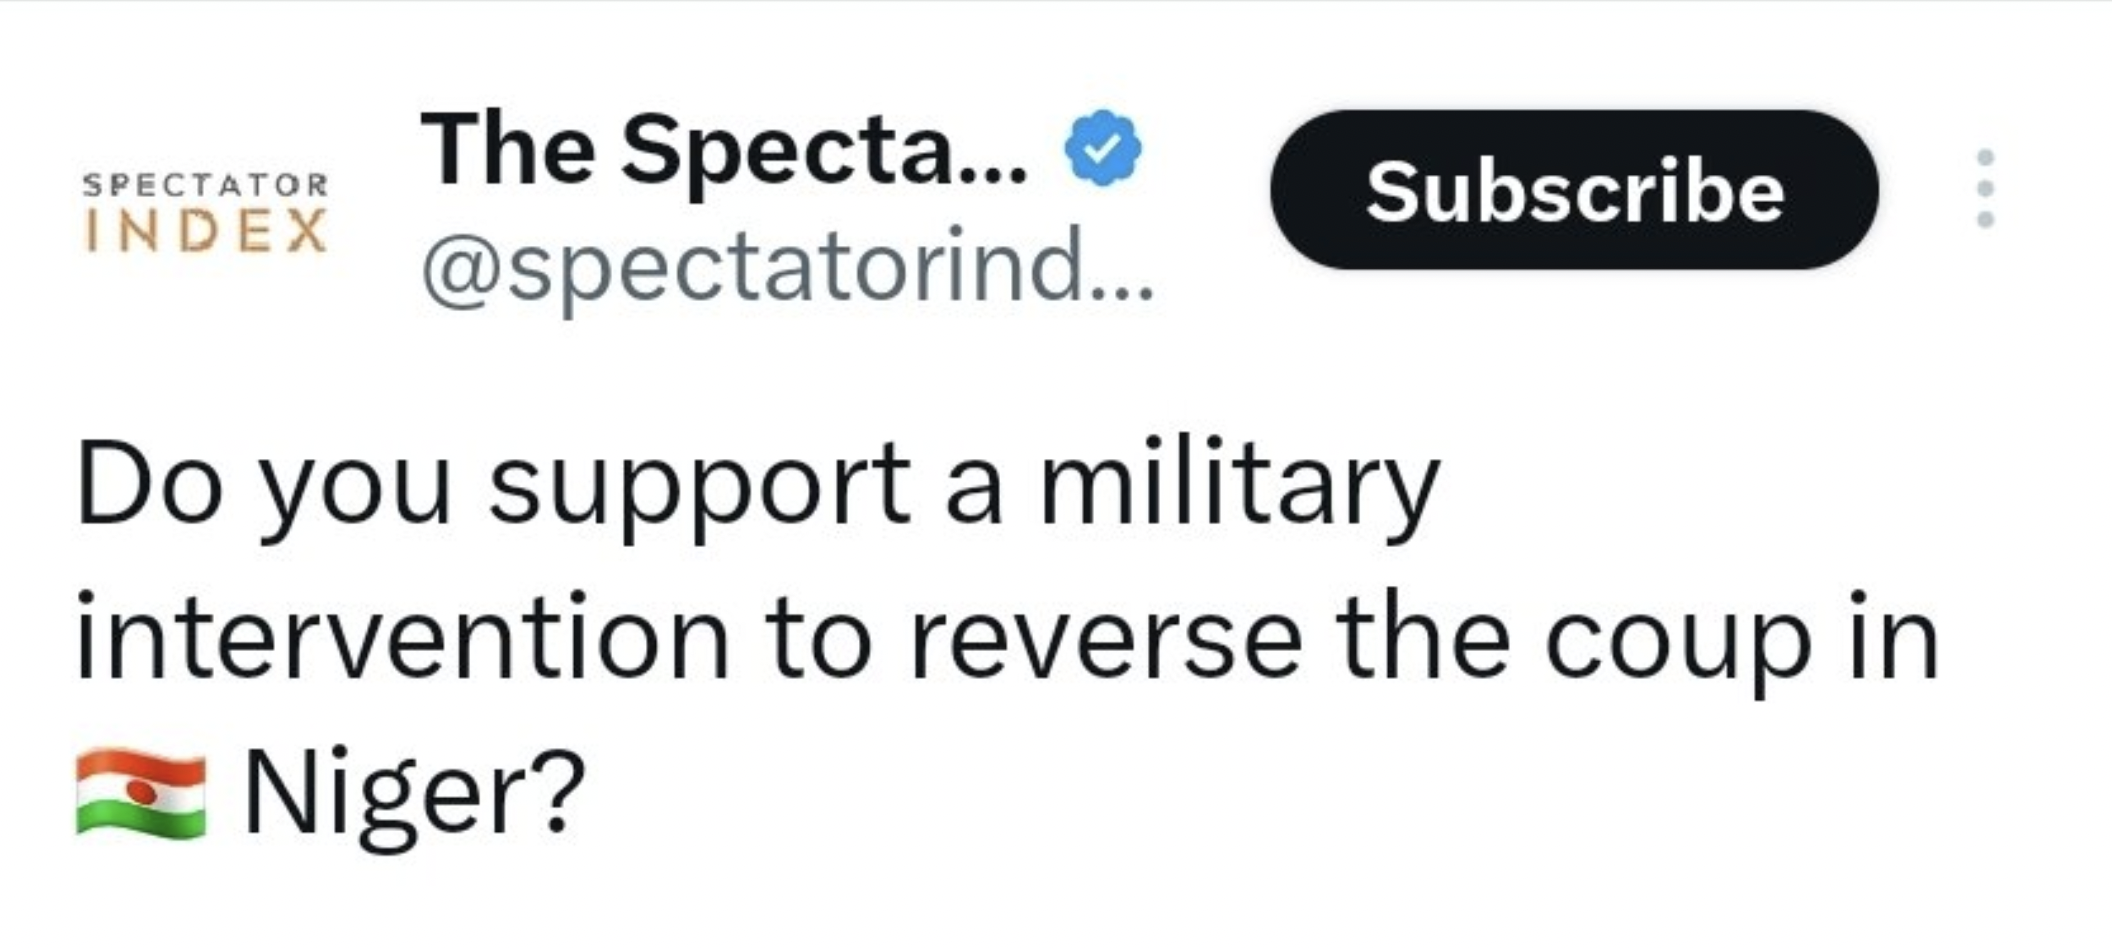 paper - Spectator Index The Specta... ... Subscribe Do you support a military intervention to reverse the coup in Niger?